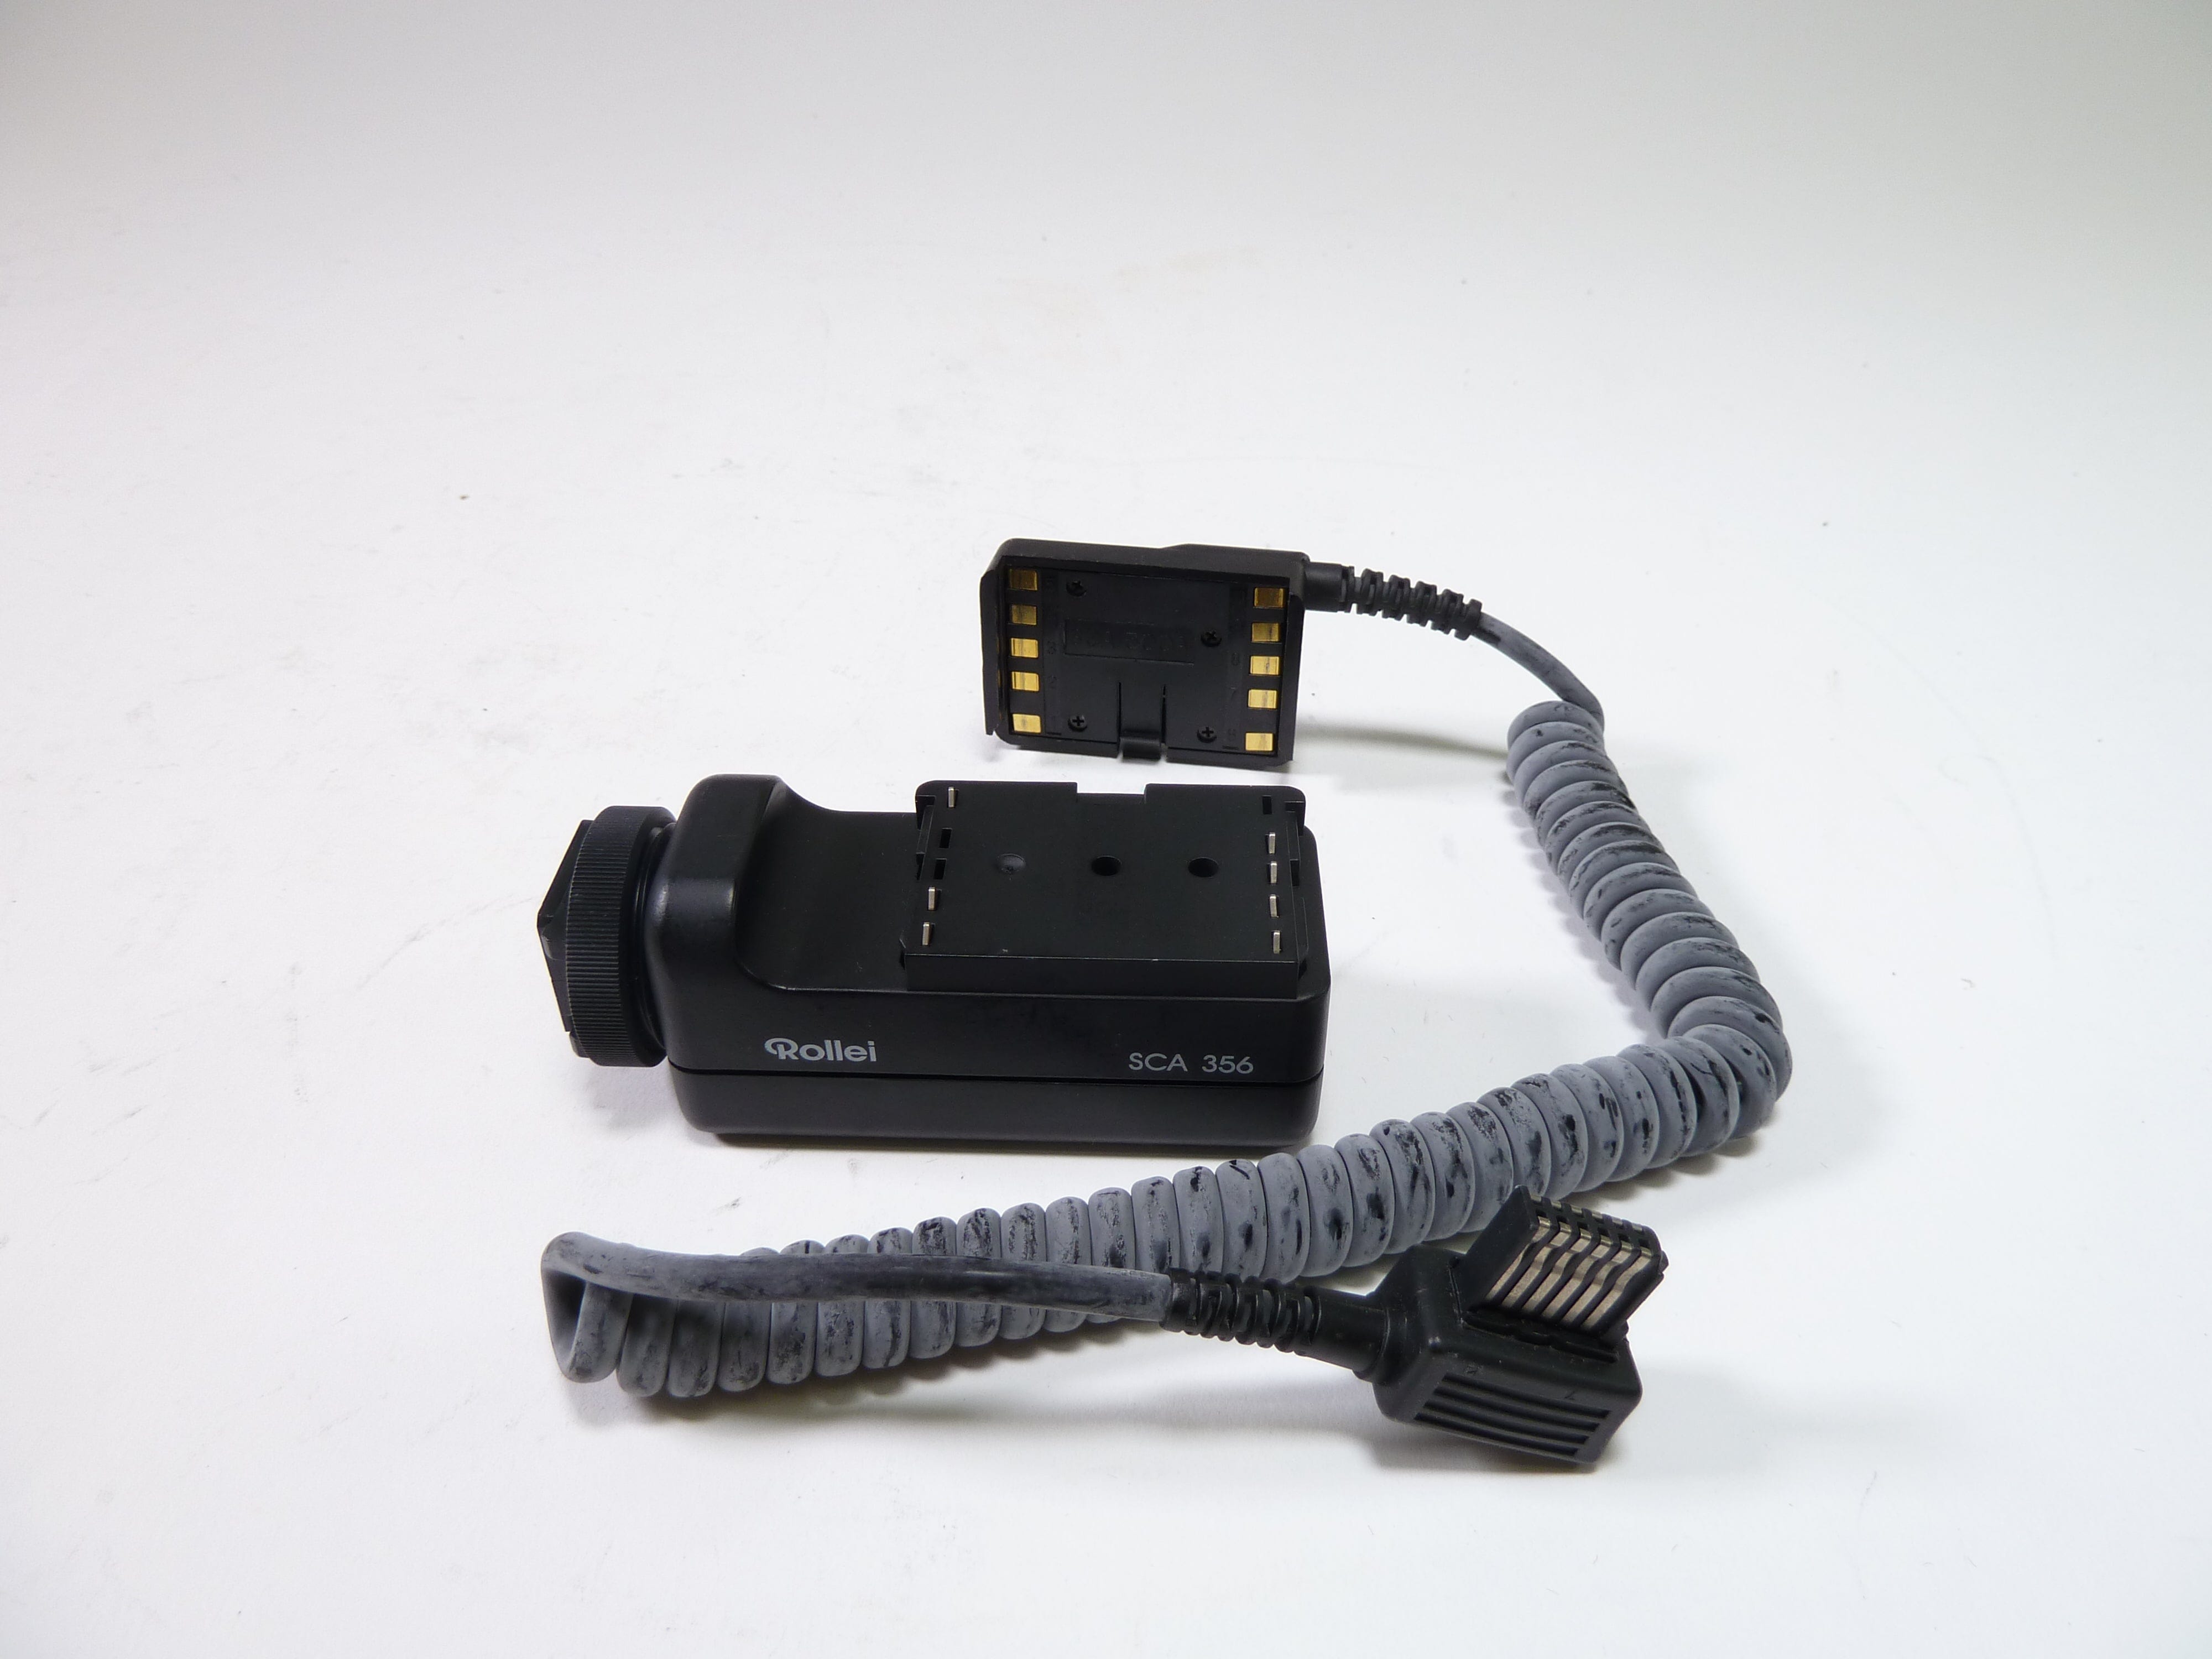 Rollei SCA 356 Adapter with Cord